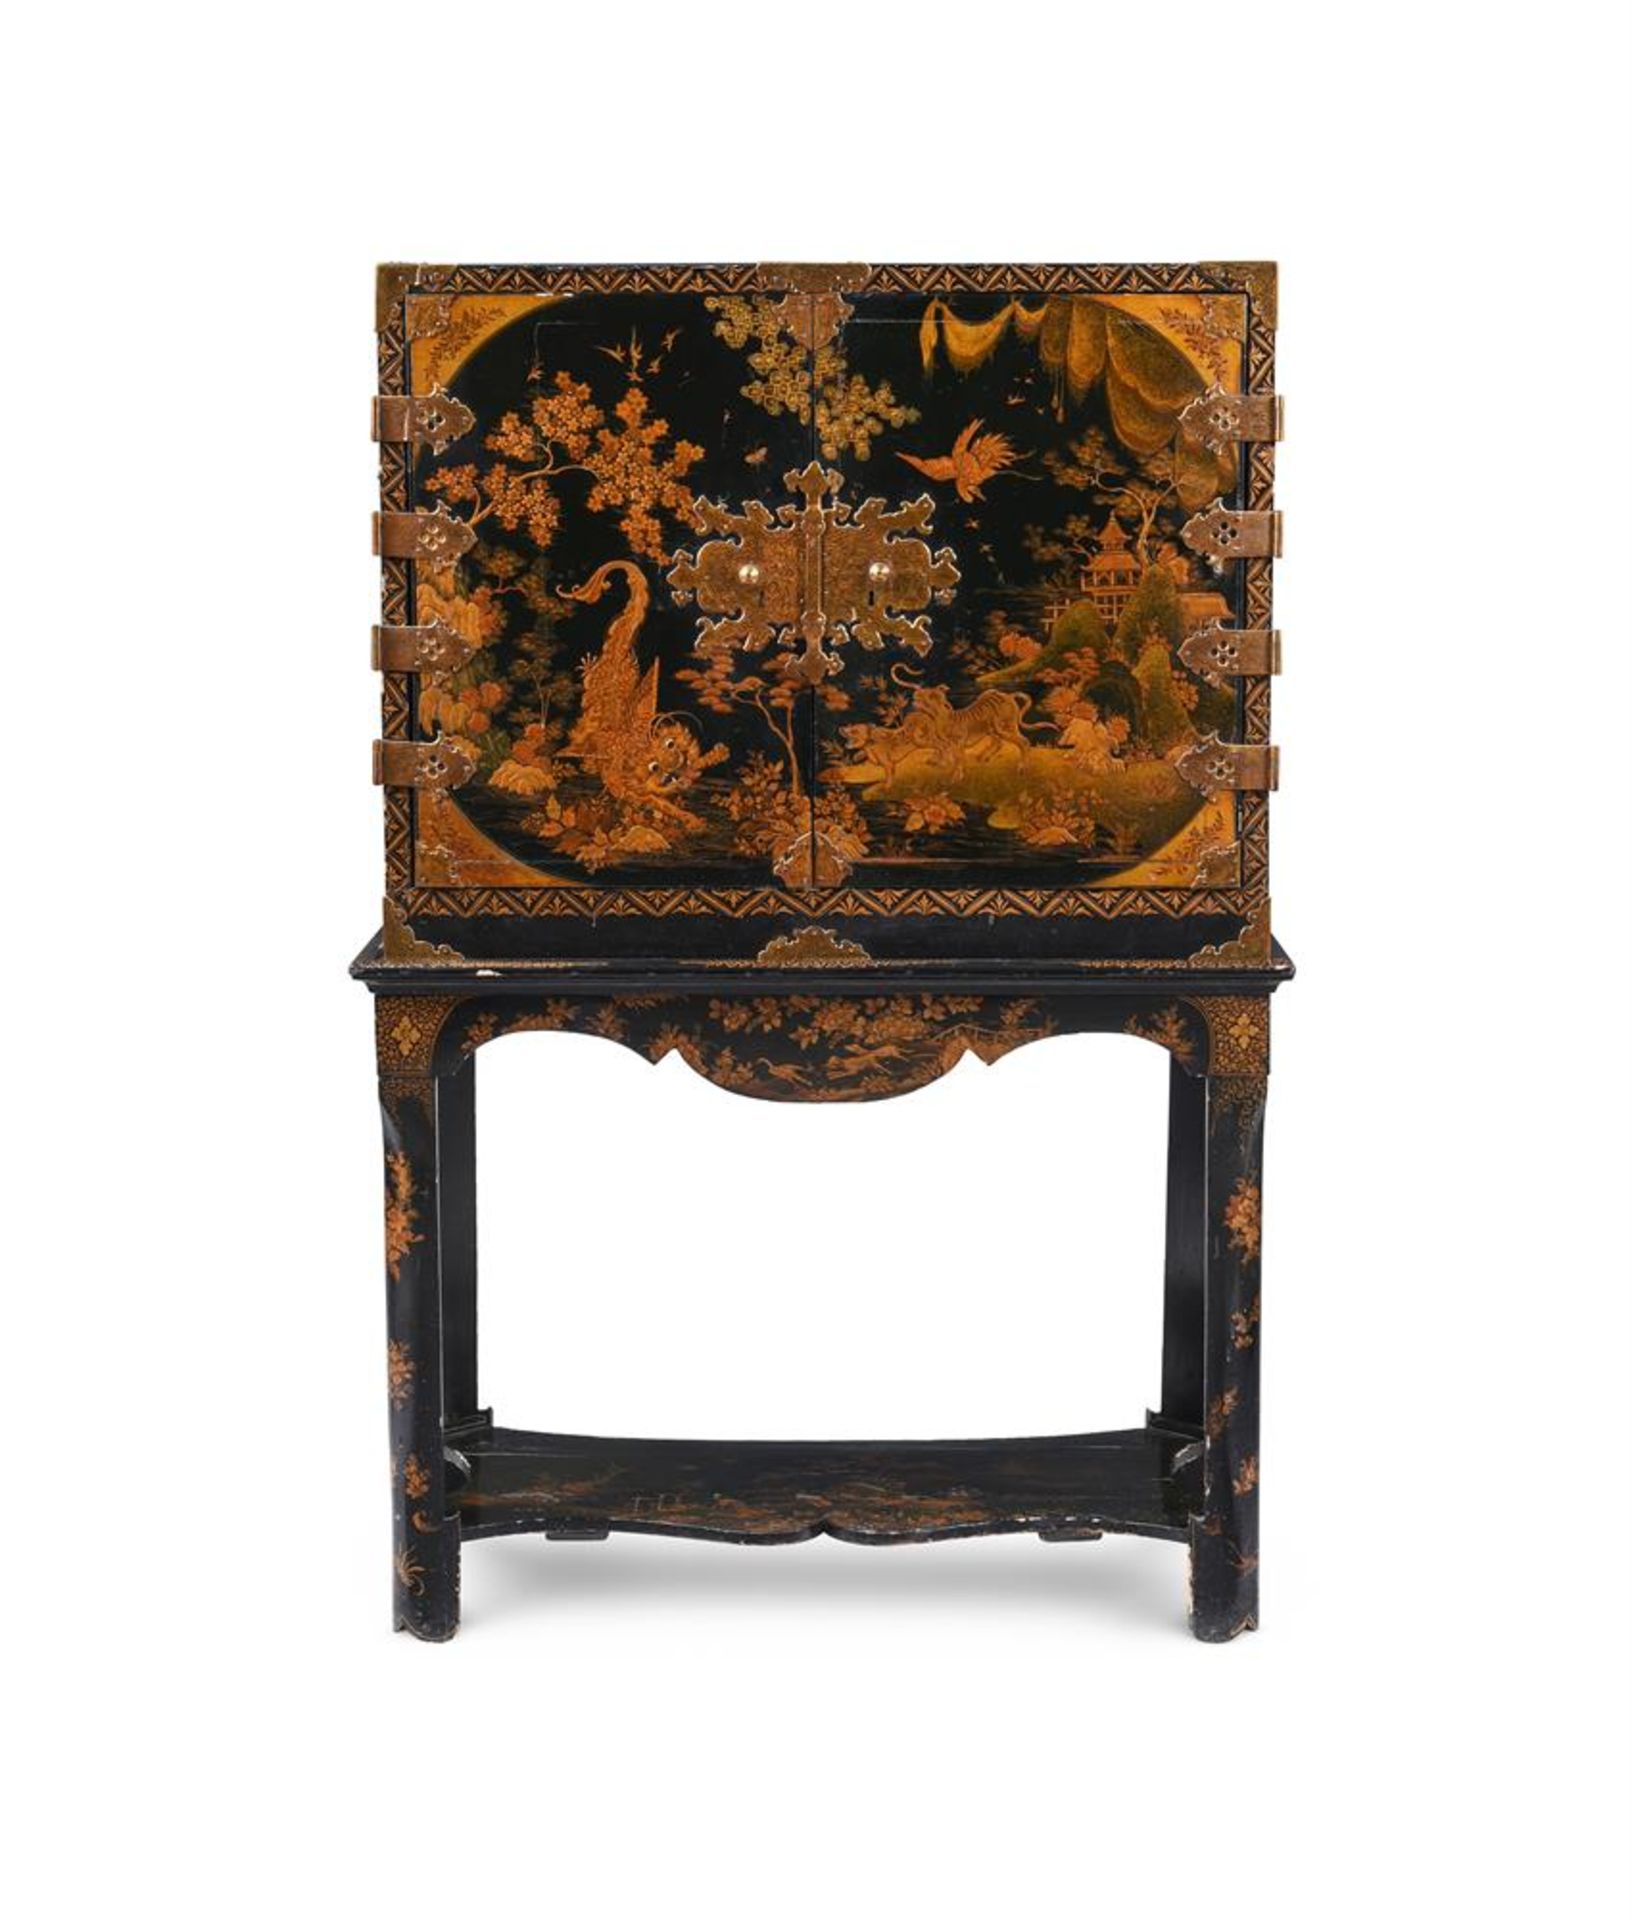 A BLACK LACQUER AND GILT CHINOISERIE DECORATED CABINET ON STAND, 18TH CENTURY